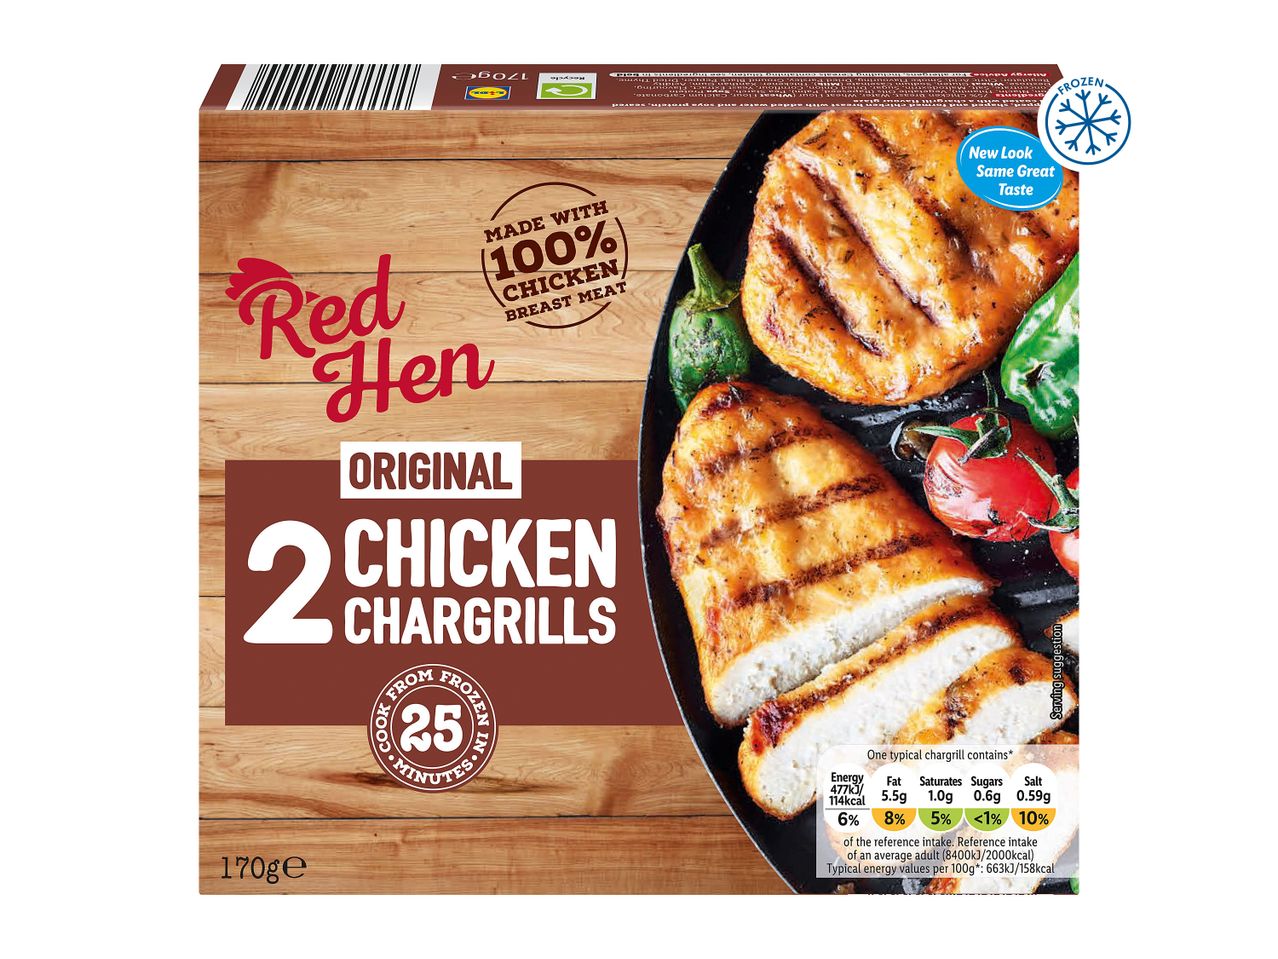 Go to full screen view: Red Hen 2 Chicken Chargrills - Image 1